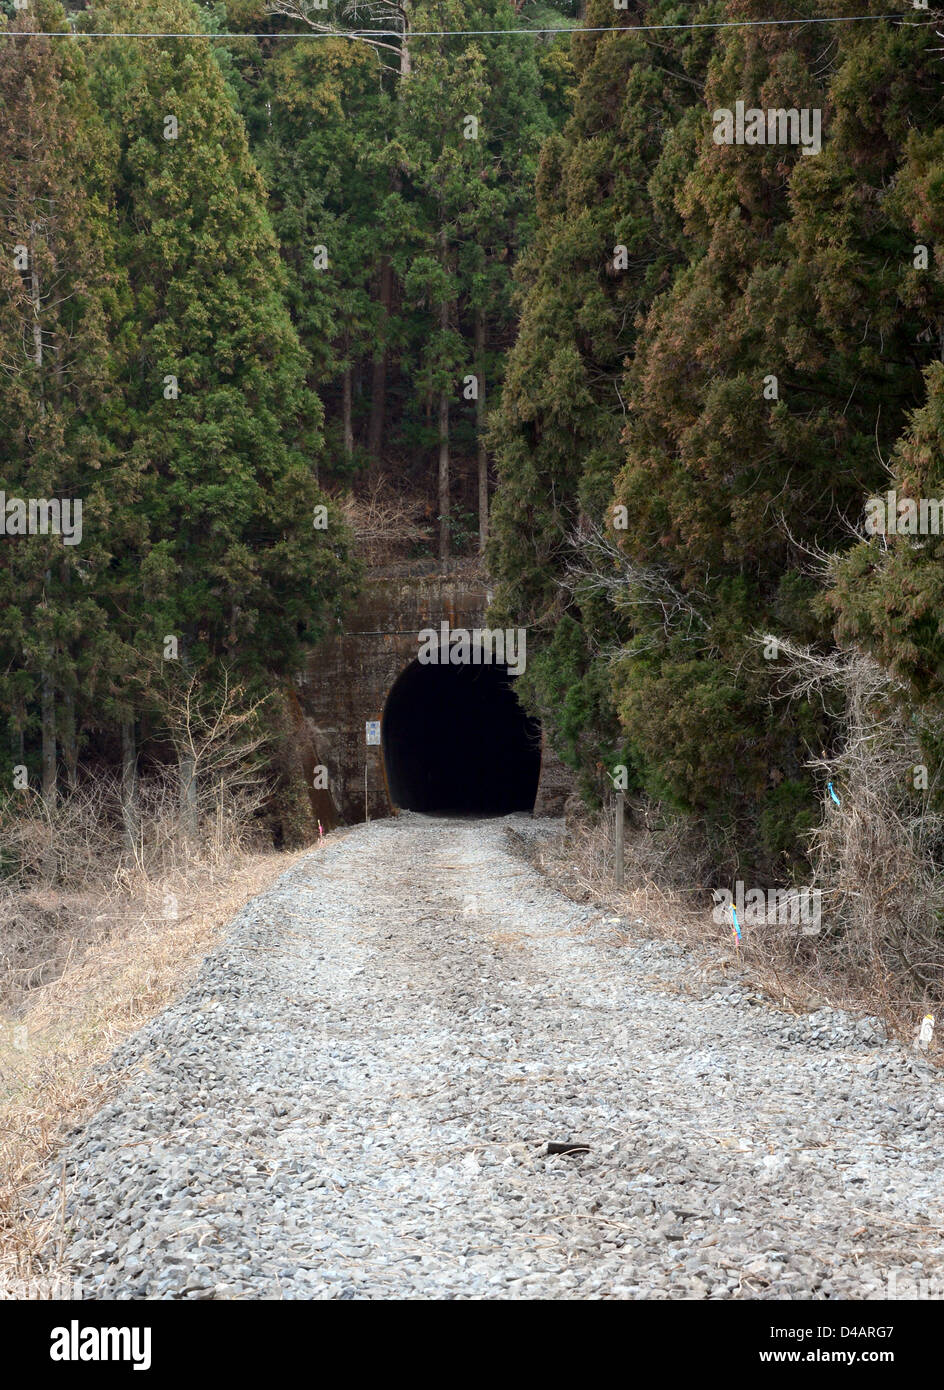 March 8, 2013, Minami-Sanriku, Japan - Only empty track bed go into the tunnel along the local Kesennuma Line near Minami-Sanriku township, Miyagi Prefecture, on March 8. The township along the Pacific coast is one of the worst hit areas when the Magnitude 9.0 earthquake and ensuing tsunami struck the nation's northeast region, leaving more than 15,000 people dead and ravaging wide swaths of coastal towns and villages two years ago on March 11.  (Photo by Natsuki Sakai/AFLO) Stock Photo